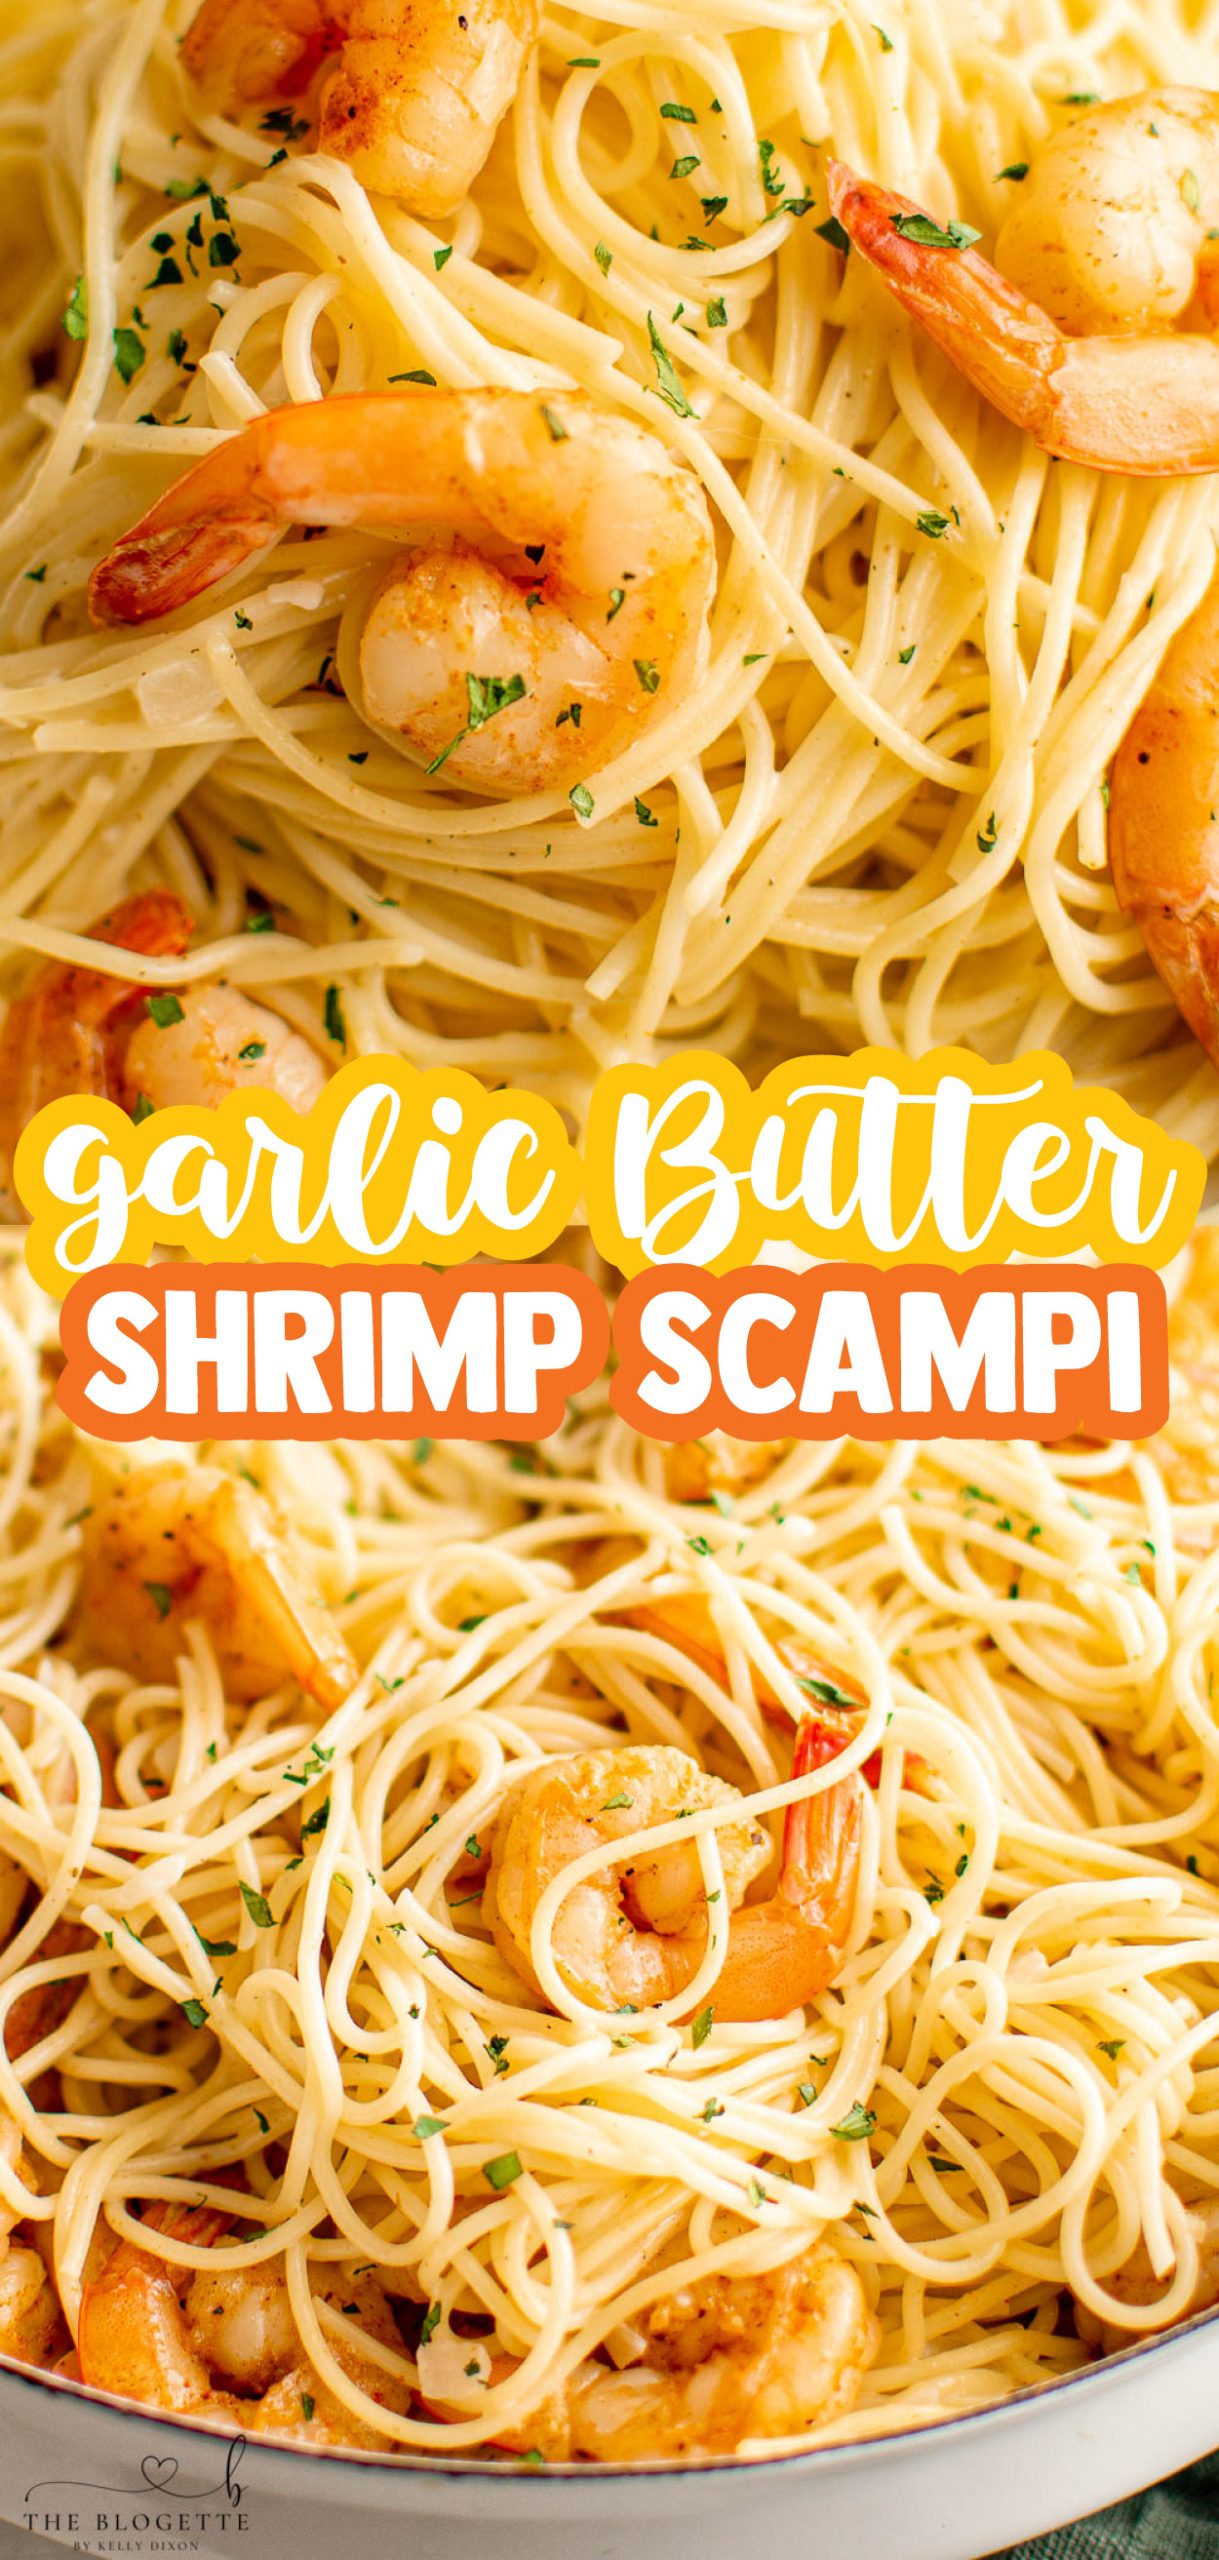 Garlic Butter Shrimp Scampi Pasta is large, juicy shrimp in garlic butter tossed in a creamy pasta. 